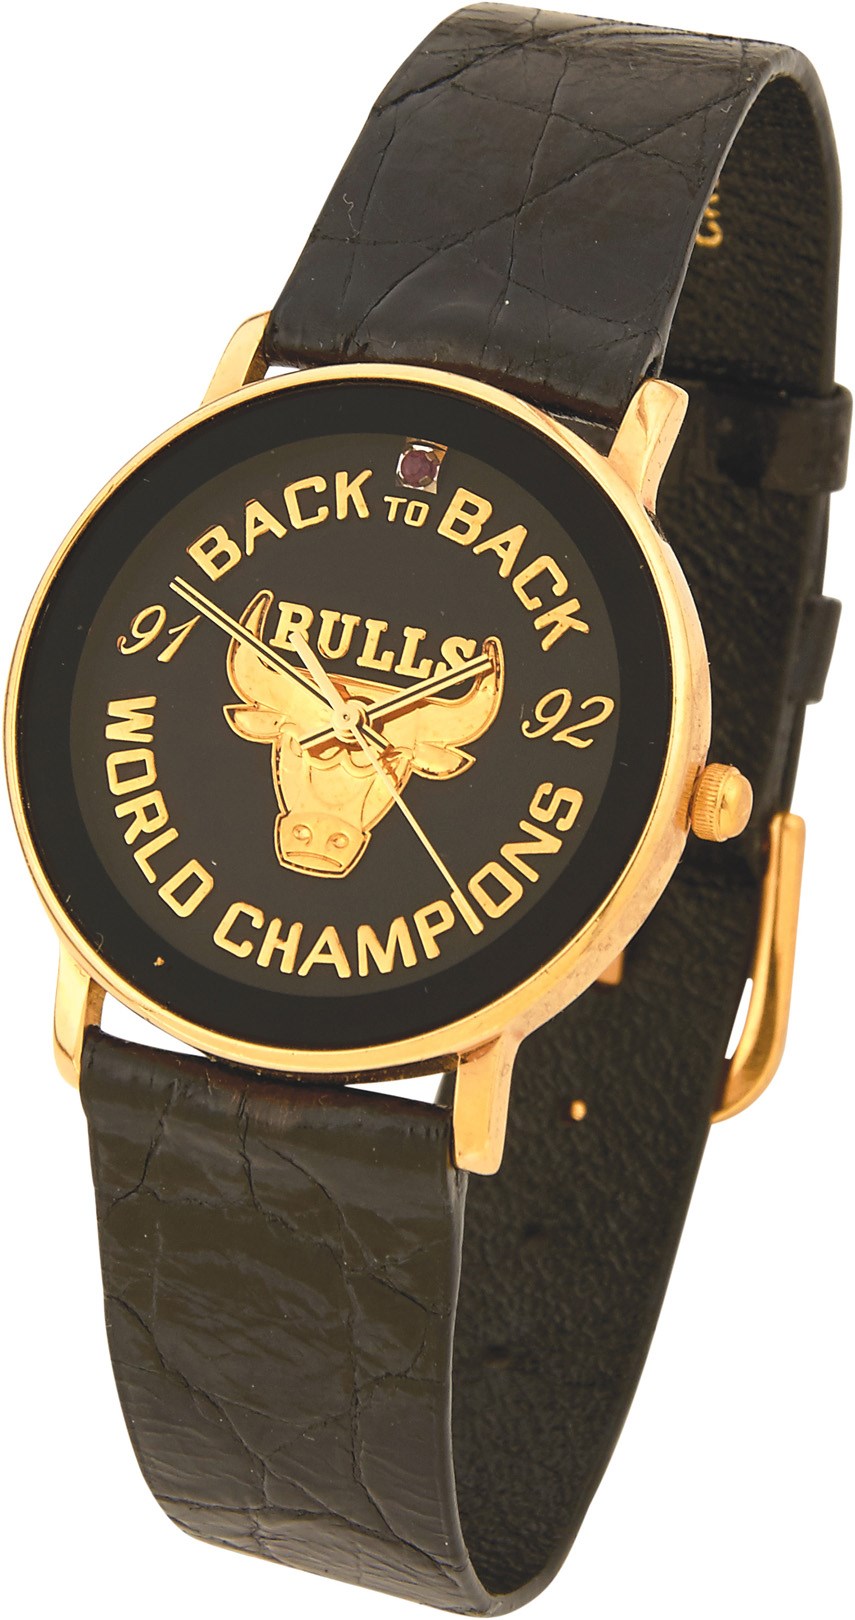 - 1991-92 Horace Grant Chicago Bulls Back to Back Championship Watch